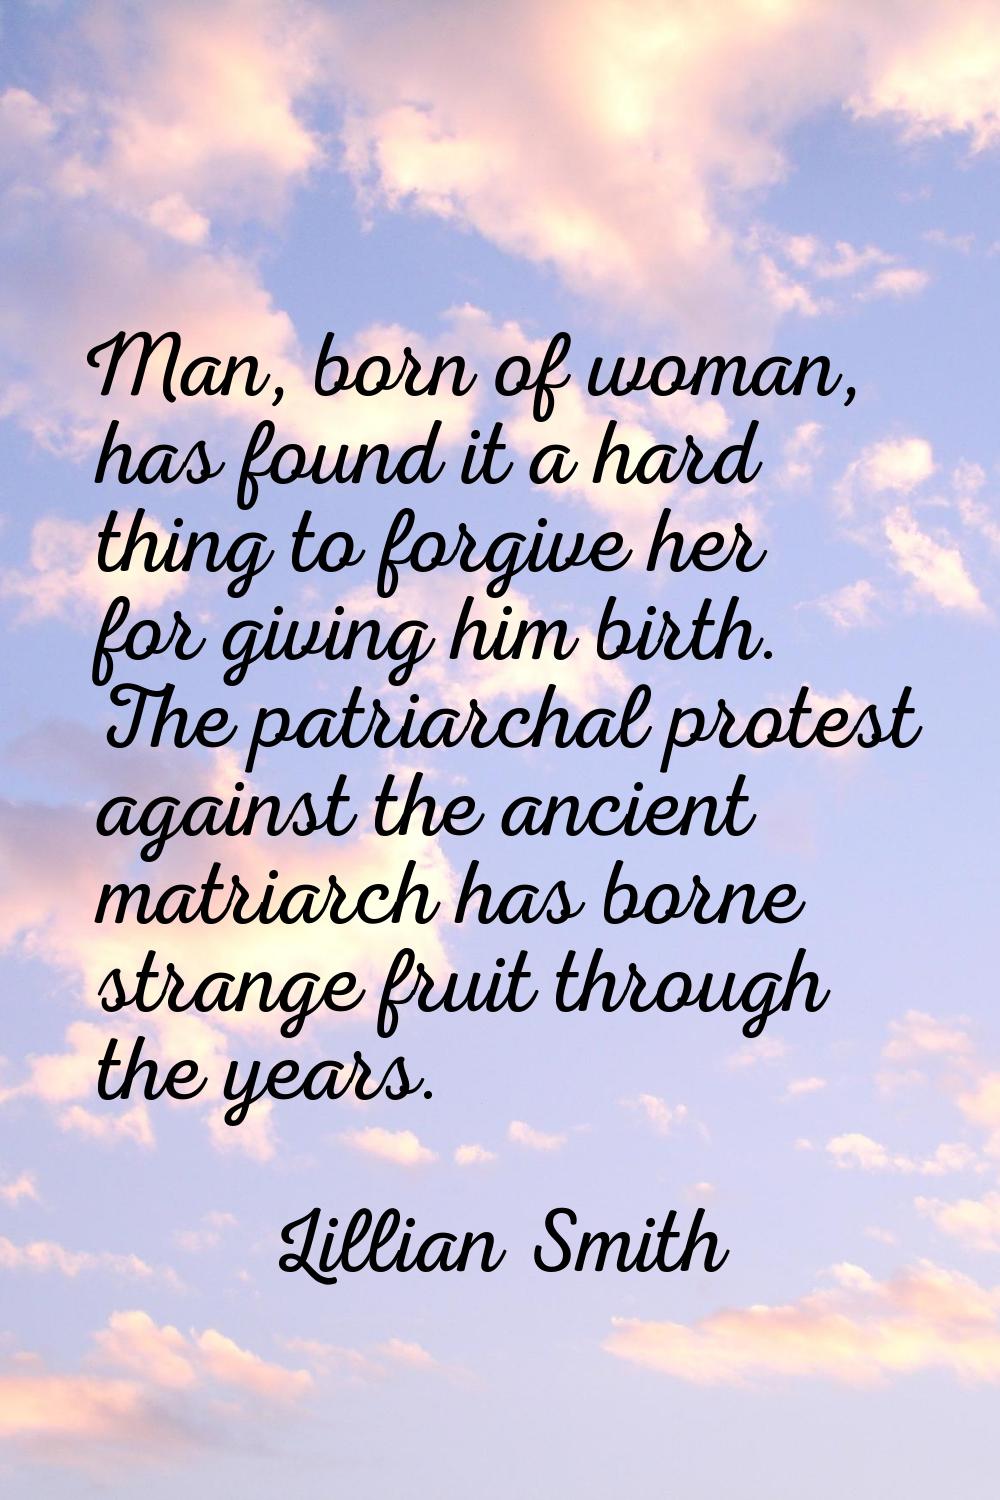 Man, born of woman, has found it a hard thing to forgive her for giving him birth. The patriarchal 